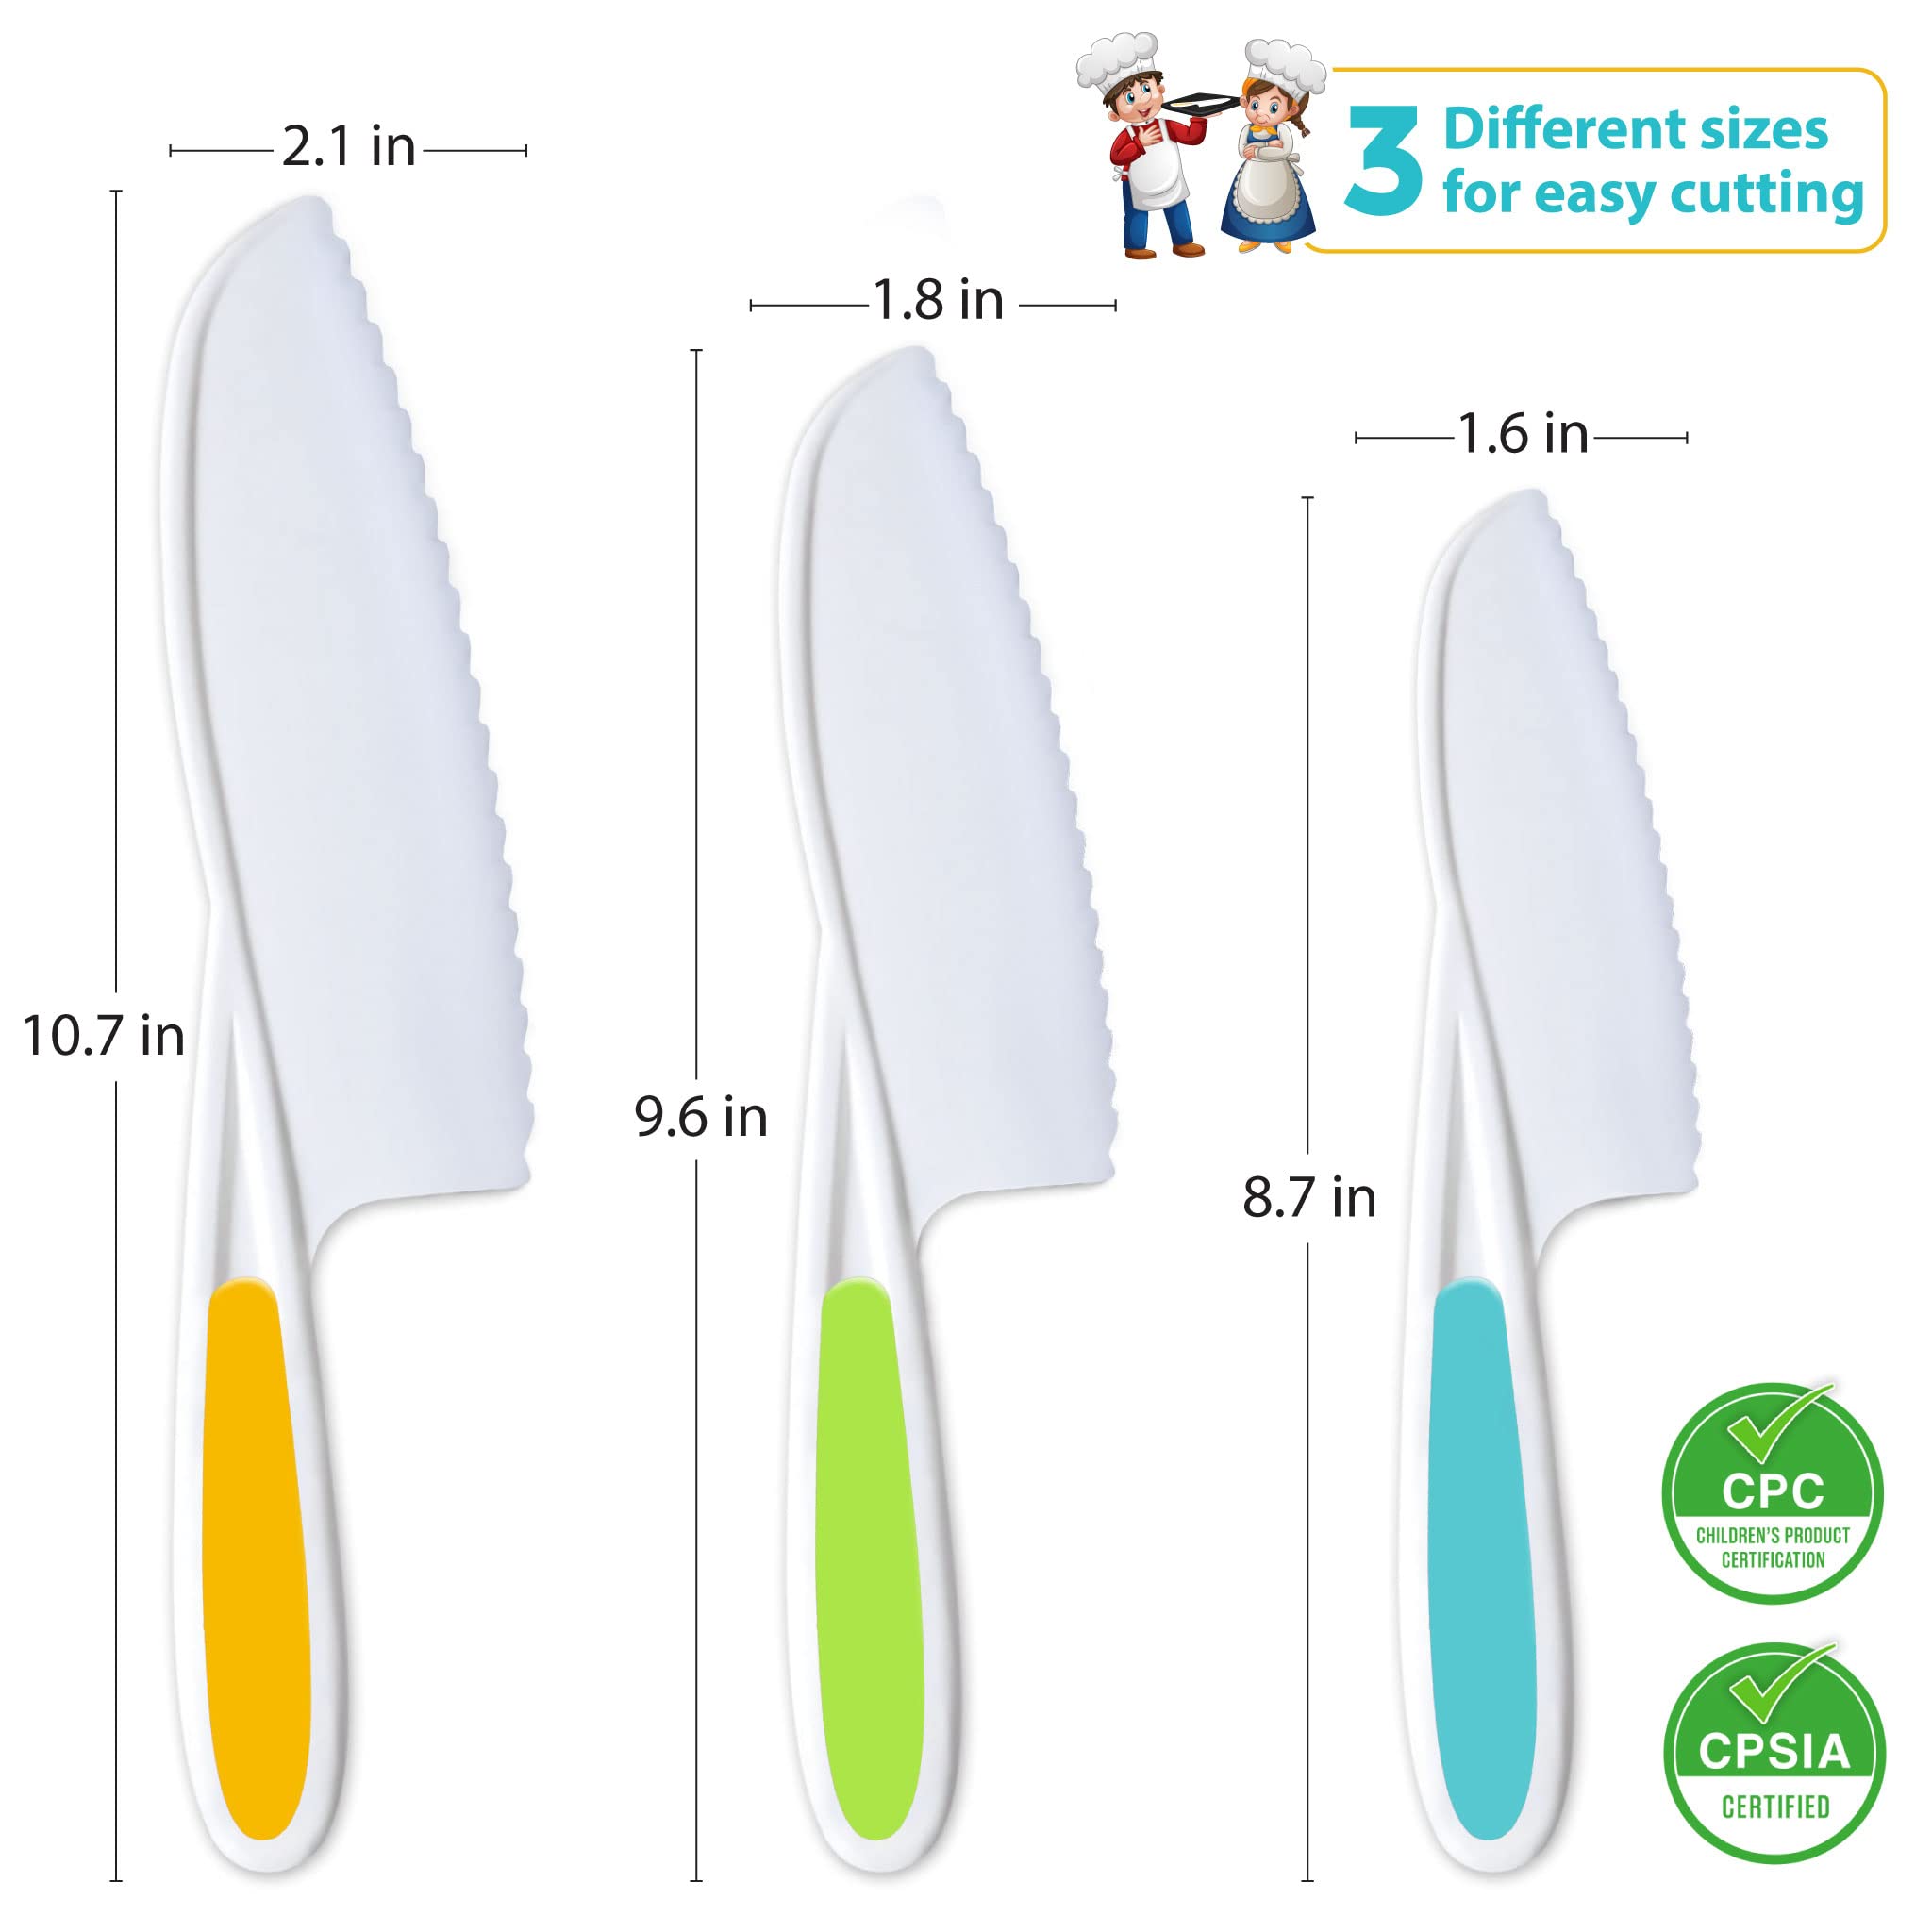 MGS Kids Knife Set of 3 for Cooking and Cutting Cakes, Fruits and Veggies Perfectly Safe for Kids Toddler Knife Set for Real Cooking